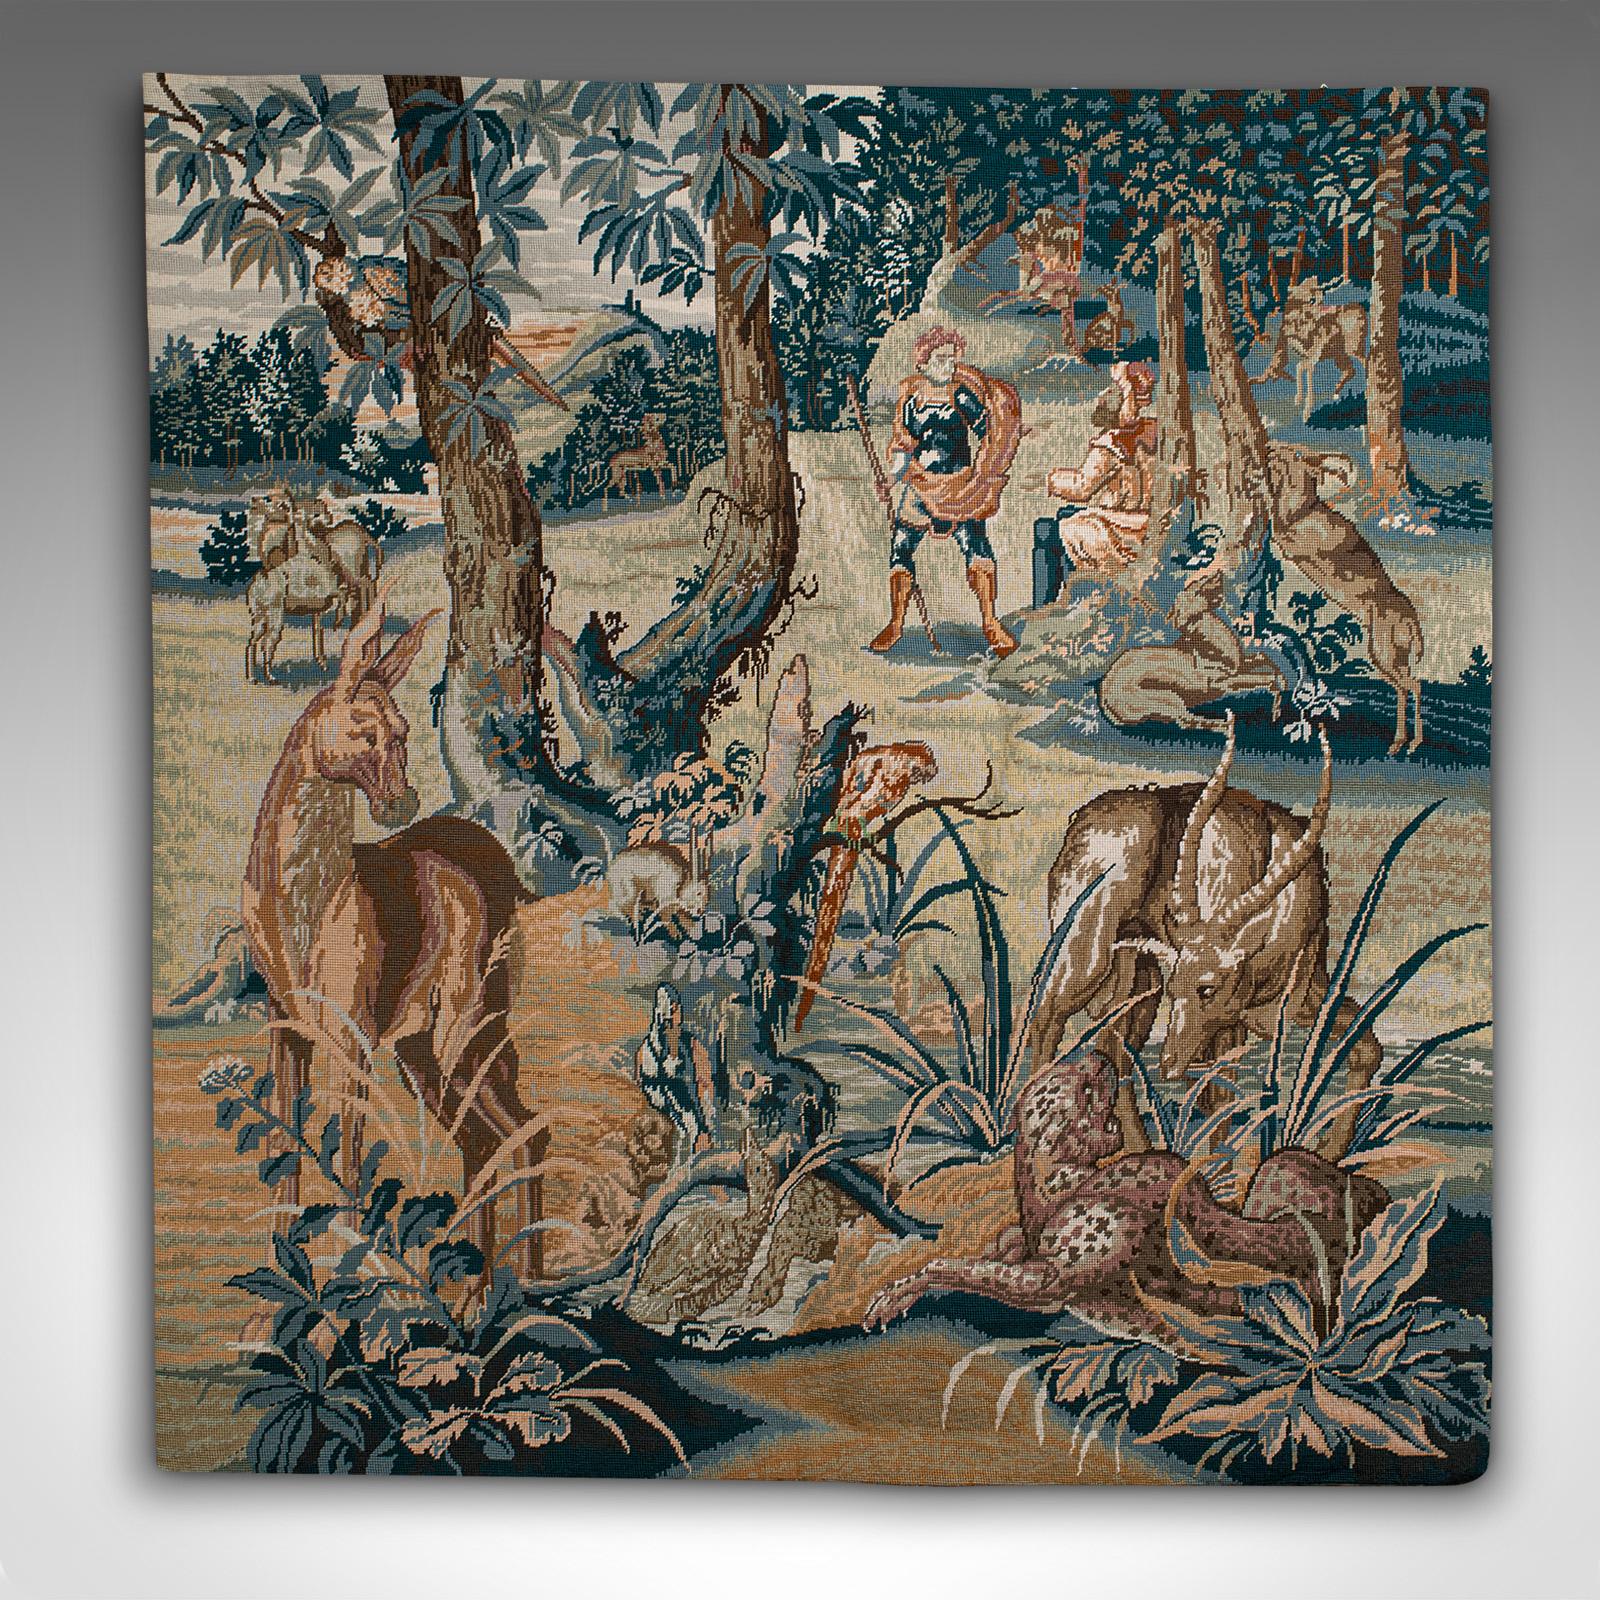 This is a large antique tapestry panel. A continental, heavy needlepoint square frieze, dating to the late Victorian period, circa 1900.

Classic tapestry with superb hand-woven detail
Generous near-square size of 130cm x 133.5cm (51.25